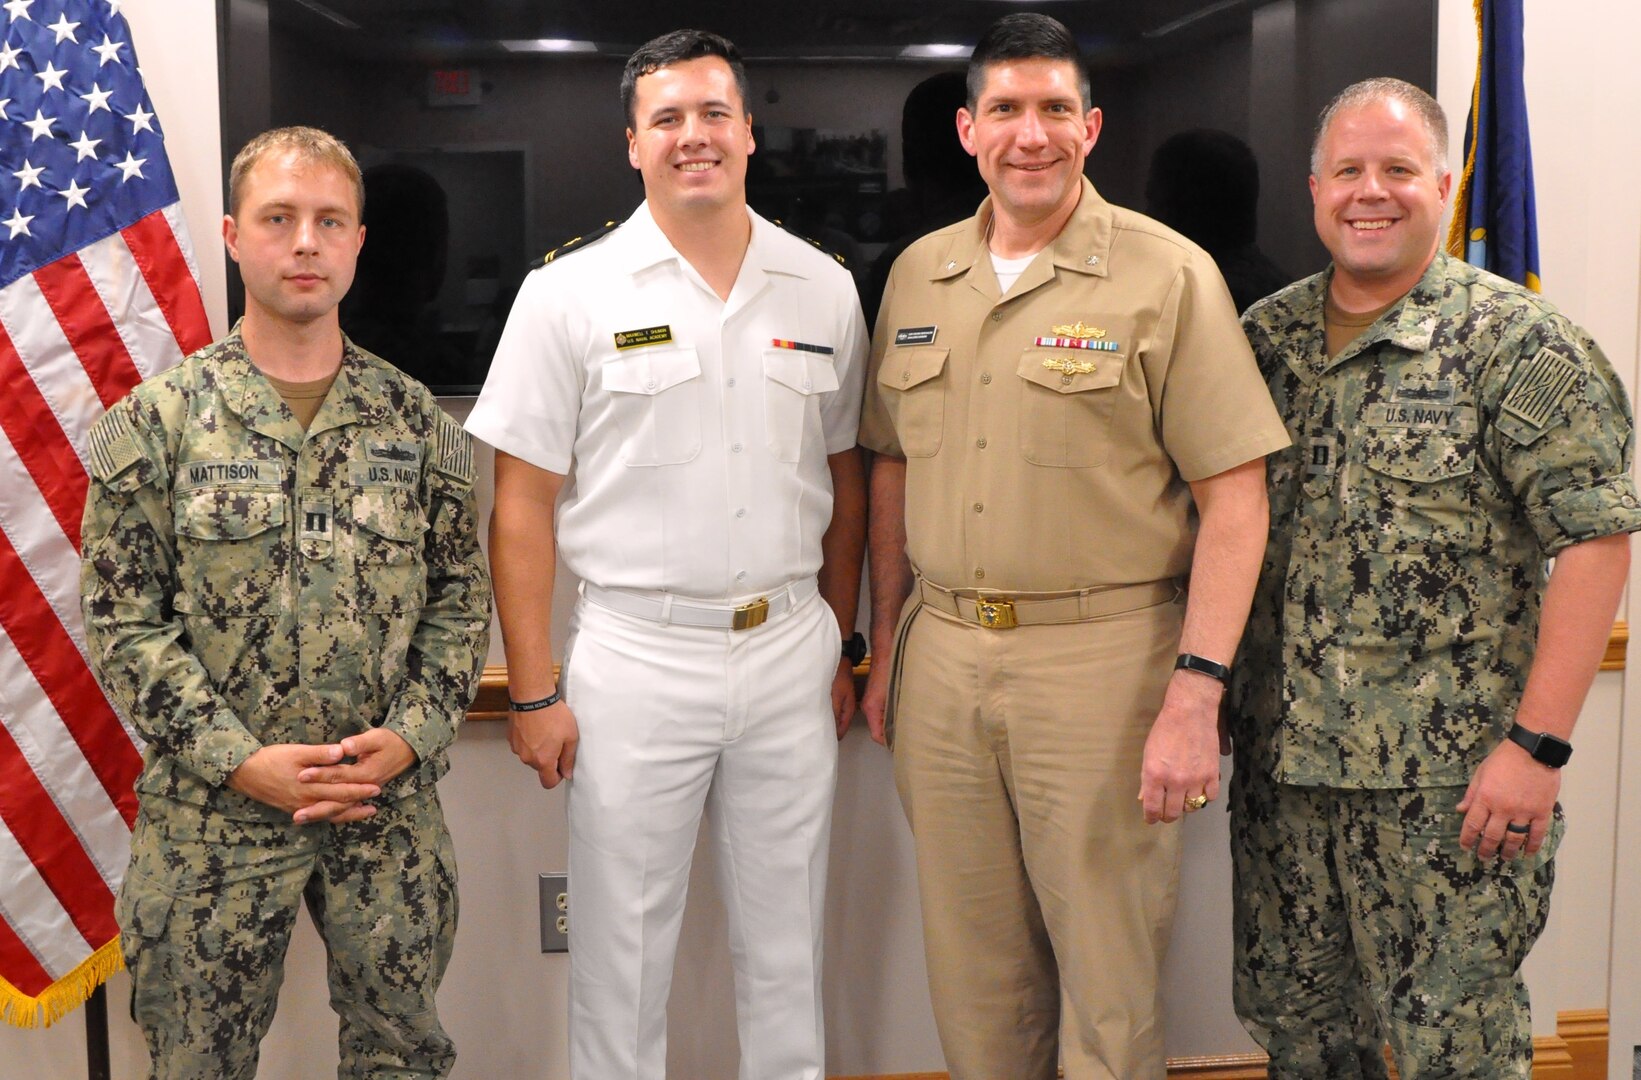 IMAGE: DAHLGREN, Va. (July 17, 2019) – U.S. Naval Academy Midshipman Max Shuman is pictured with the officers he briefed on his Naval Surface Warfare Center Dahlgren Division internship at the command’s Laser Lethality and Development Facility which features an above-ground tunnel used for evaluating high energy laser weapon systems. Pictured left to right: Lt. Adam Mattison, Shuman, Cmdr. Steven Perchalski, and Lt. Paul Cross.